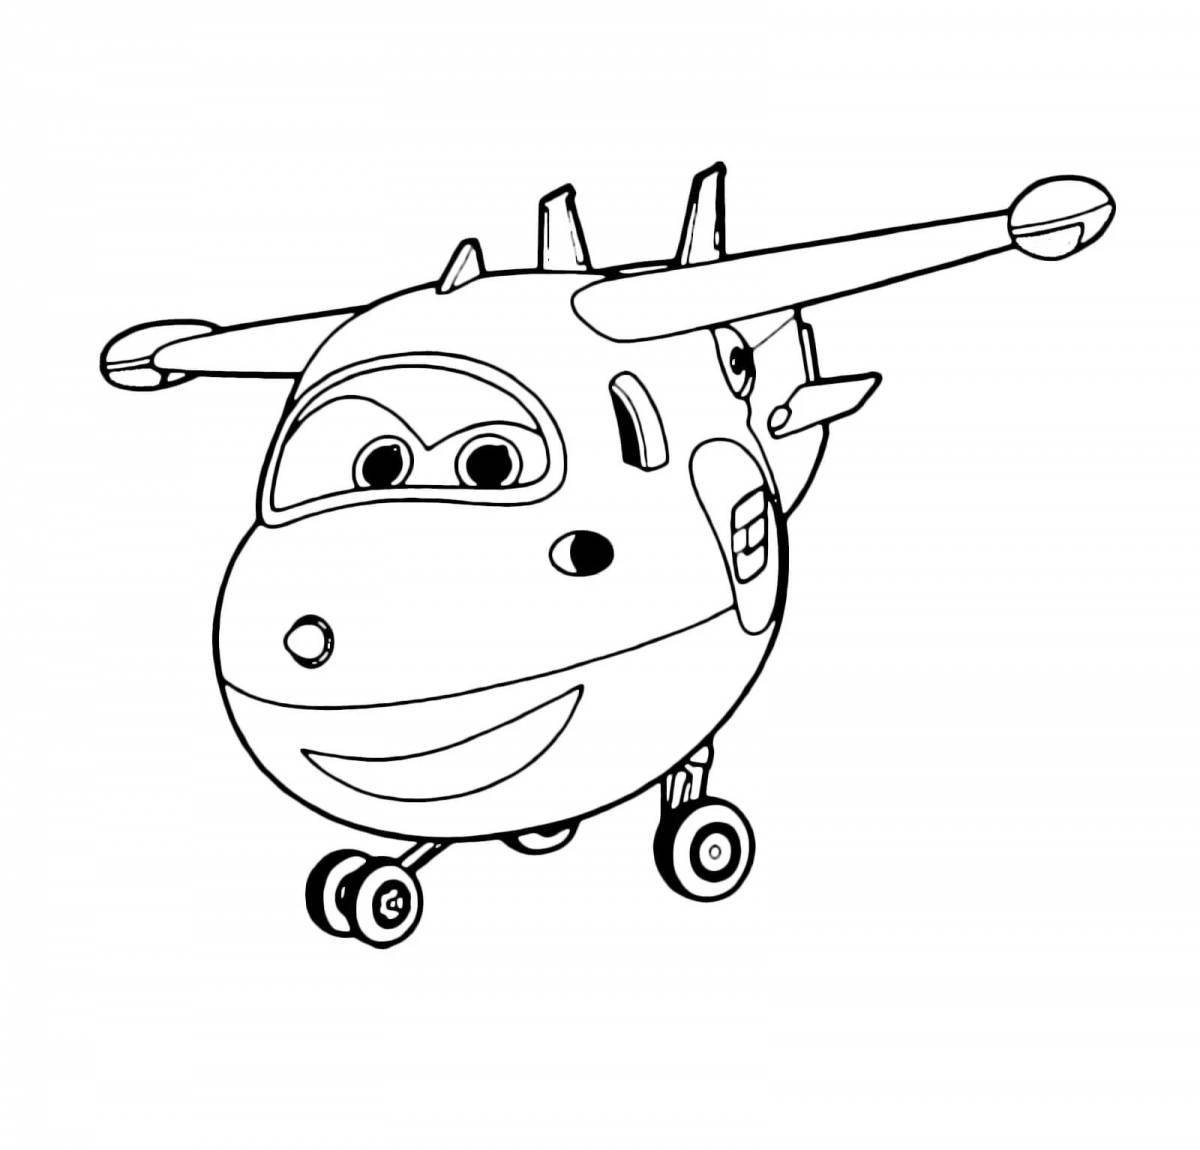 Fantastic airplane coloring page